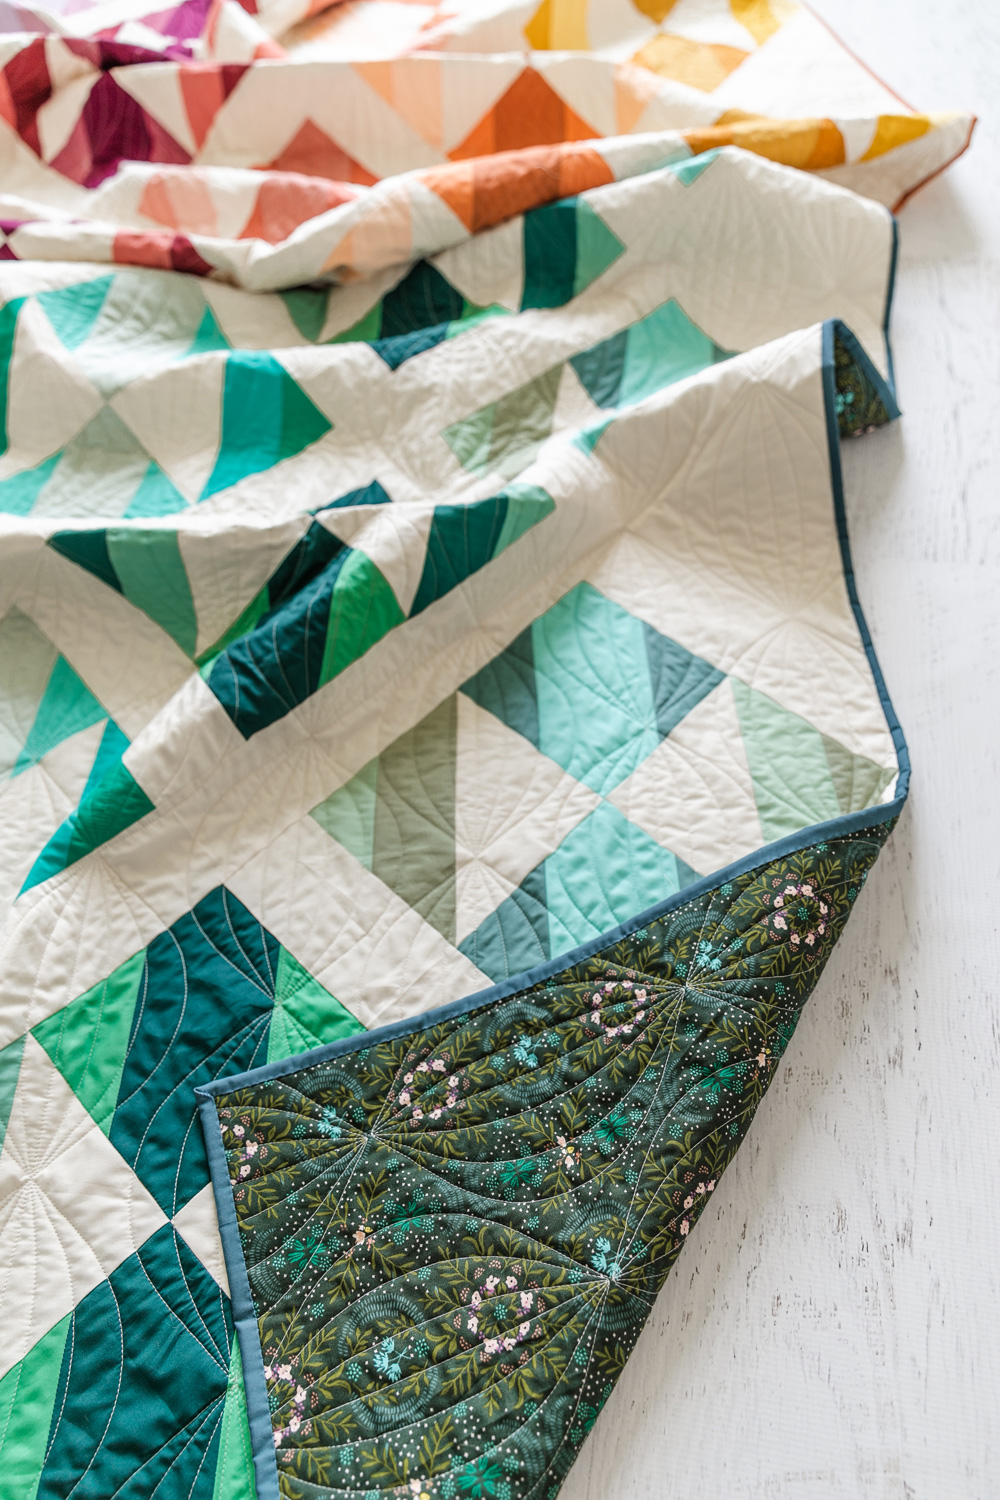 This modern ombre fat quarter quilt pattern is a good beginner quilt pattern and makes a beautiful scrap quilt. The sewing pattern also includes instructions for a limited-color version. suzyquilts.com #quiltpattern #modernquilt